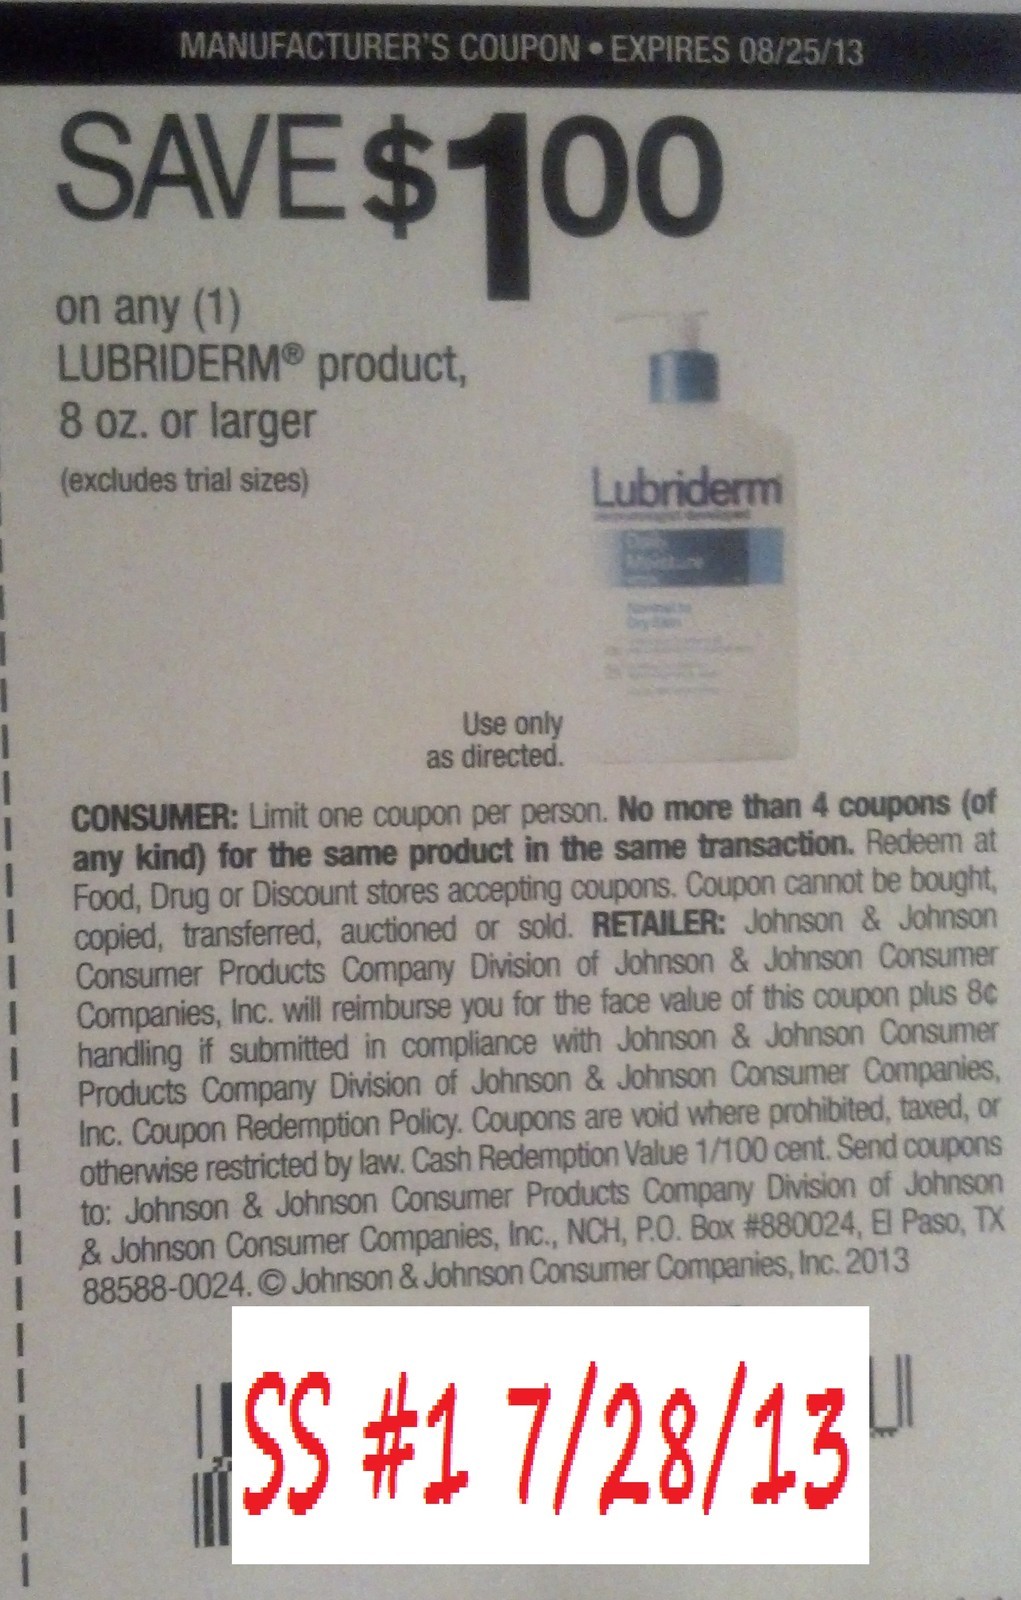 Save $1.00 on any Lubriderm product 8 oz or larger (Excludes trial size) Expires 08-25-2013